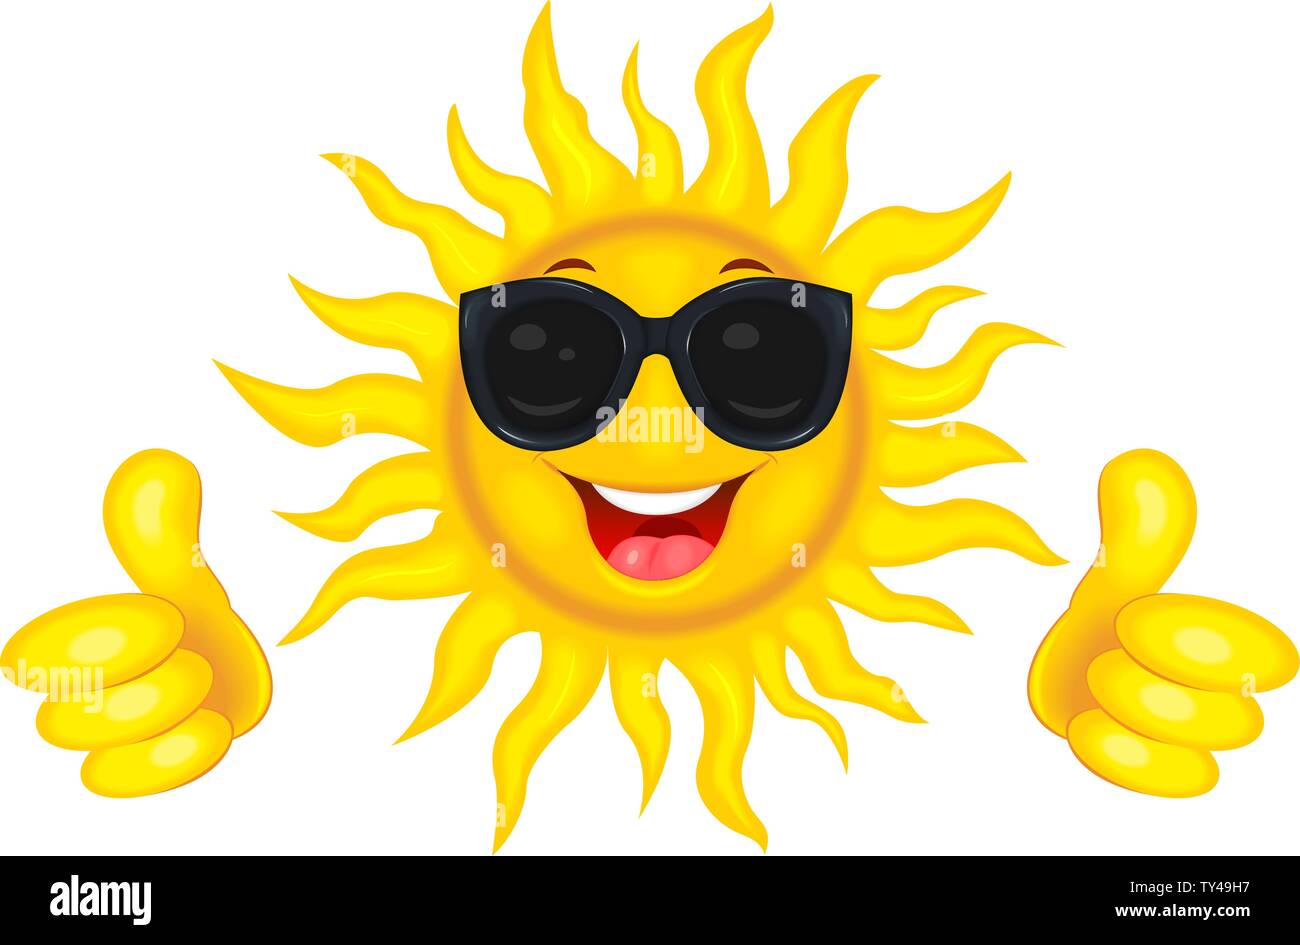 A merry cartoon sun in protective glasses from the sun. A cheerful cartoon sun on a white background. Smiling sun and hands with a finger raised up. Stock Vector